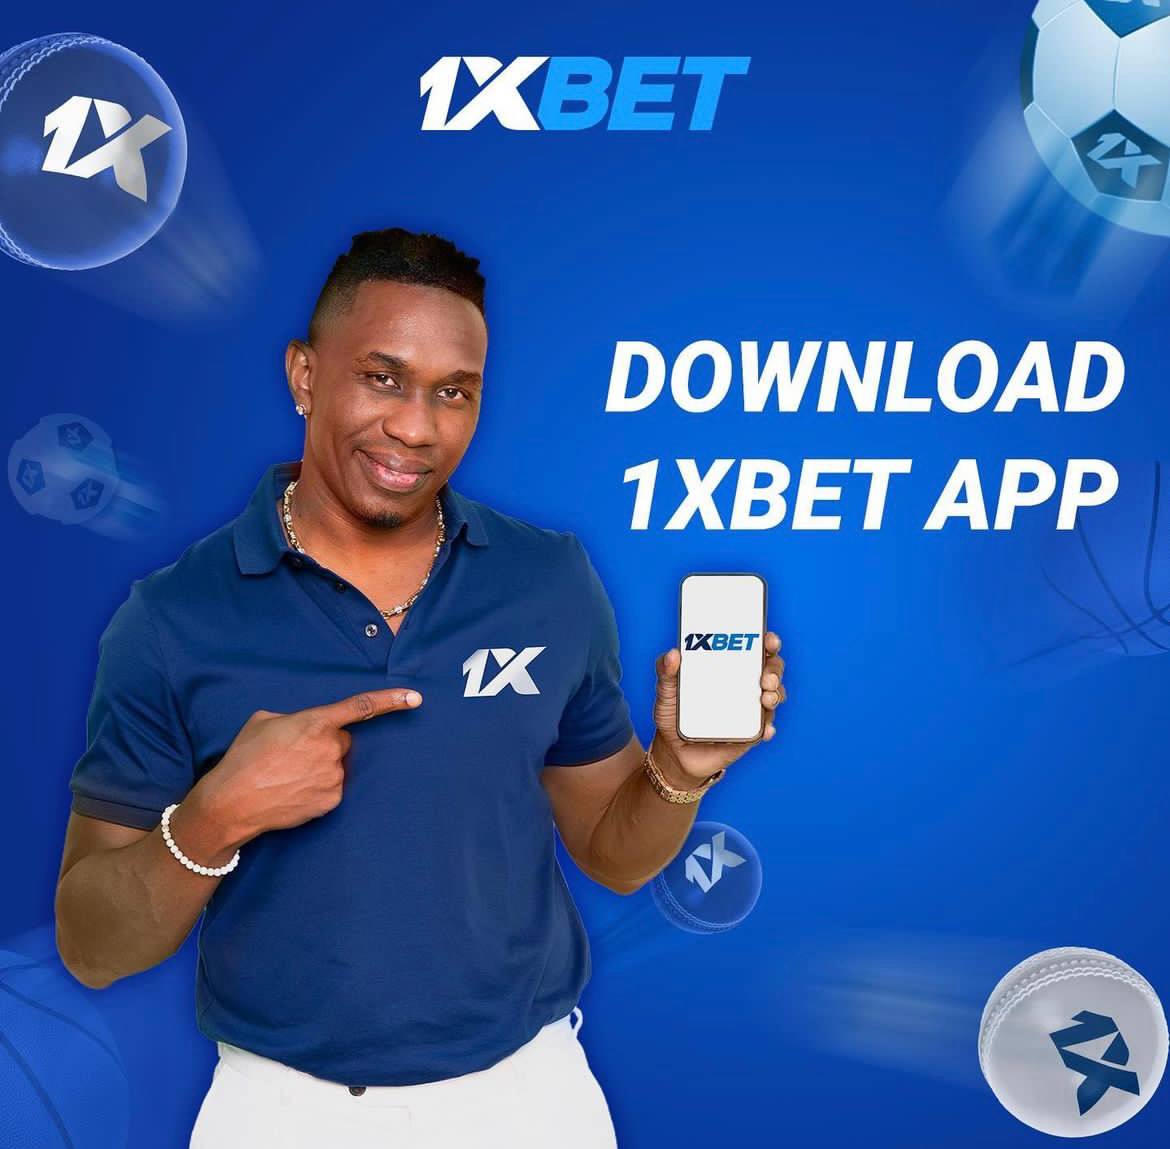 Finding Customers With 1xbet download Part B